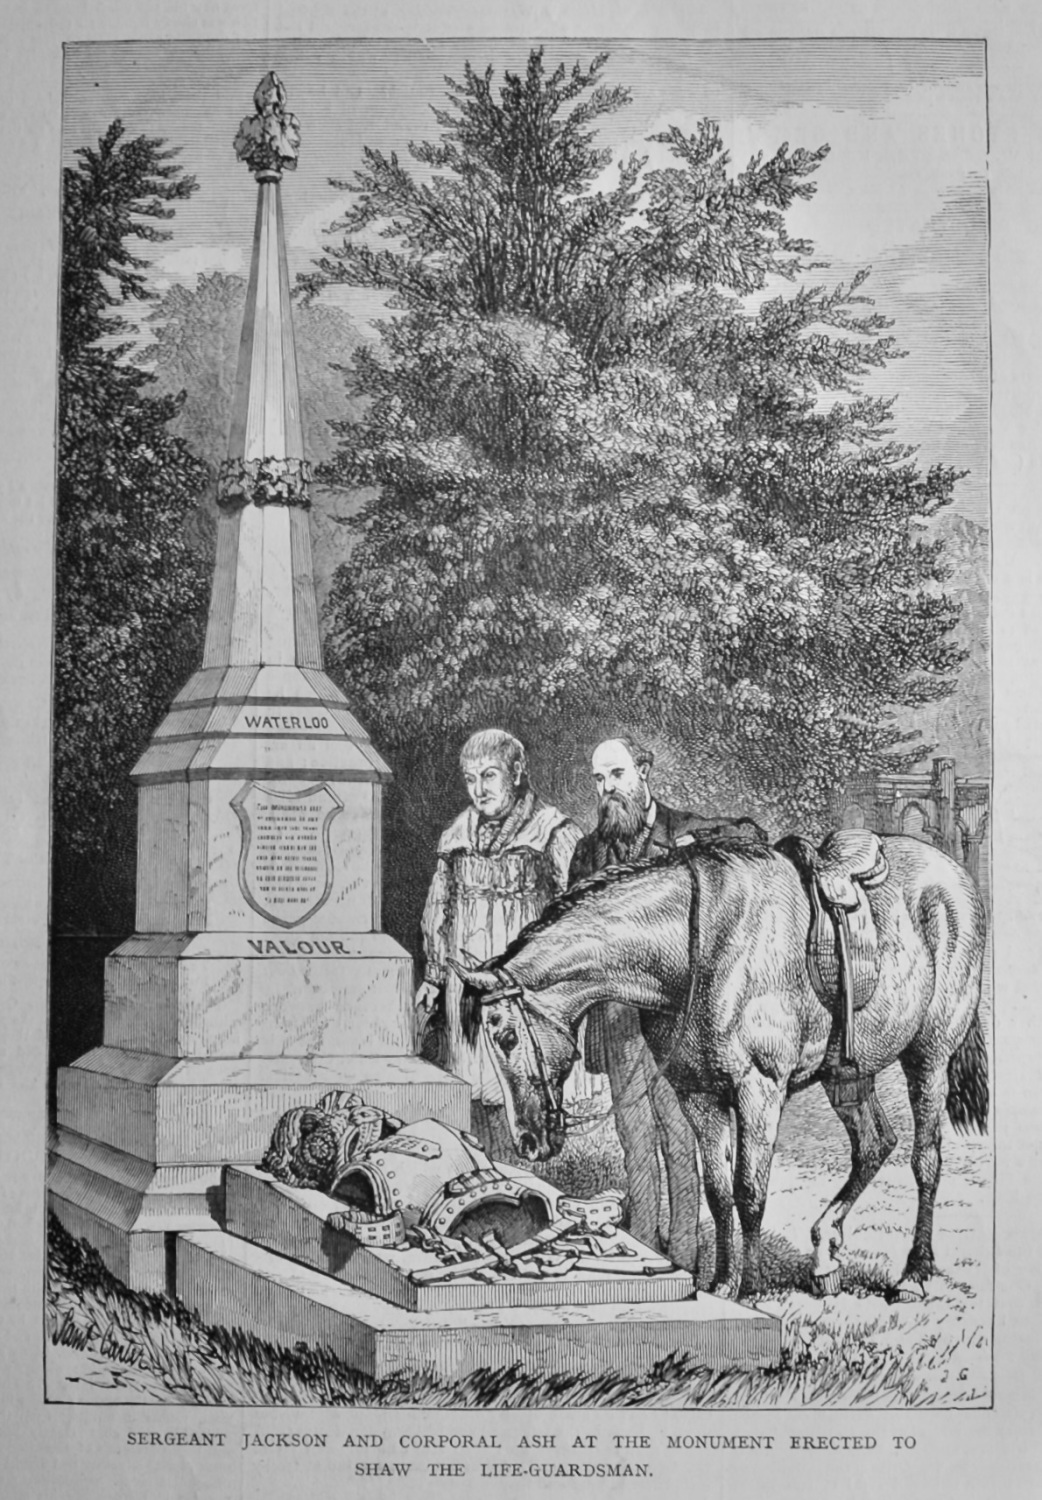 Sergeant Jackson and Corporal Ash at the Monument erected to Shaw the Life-